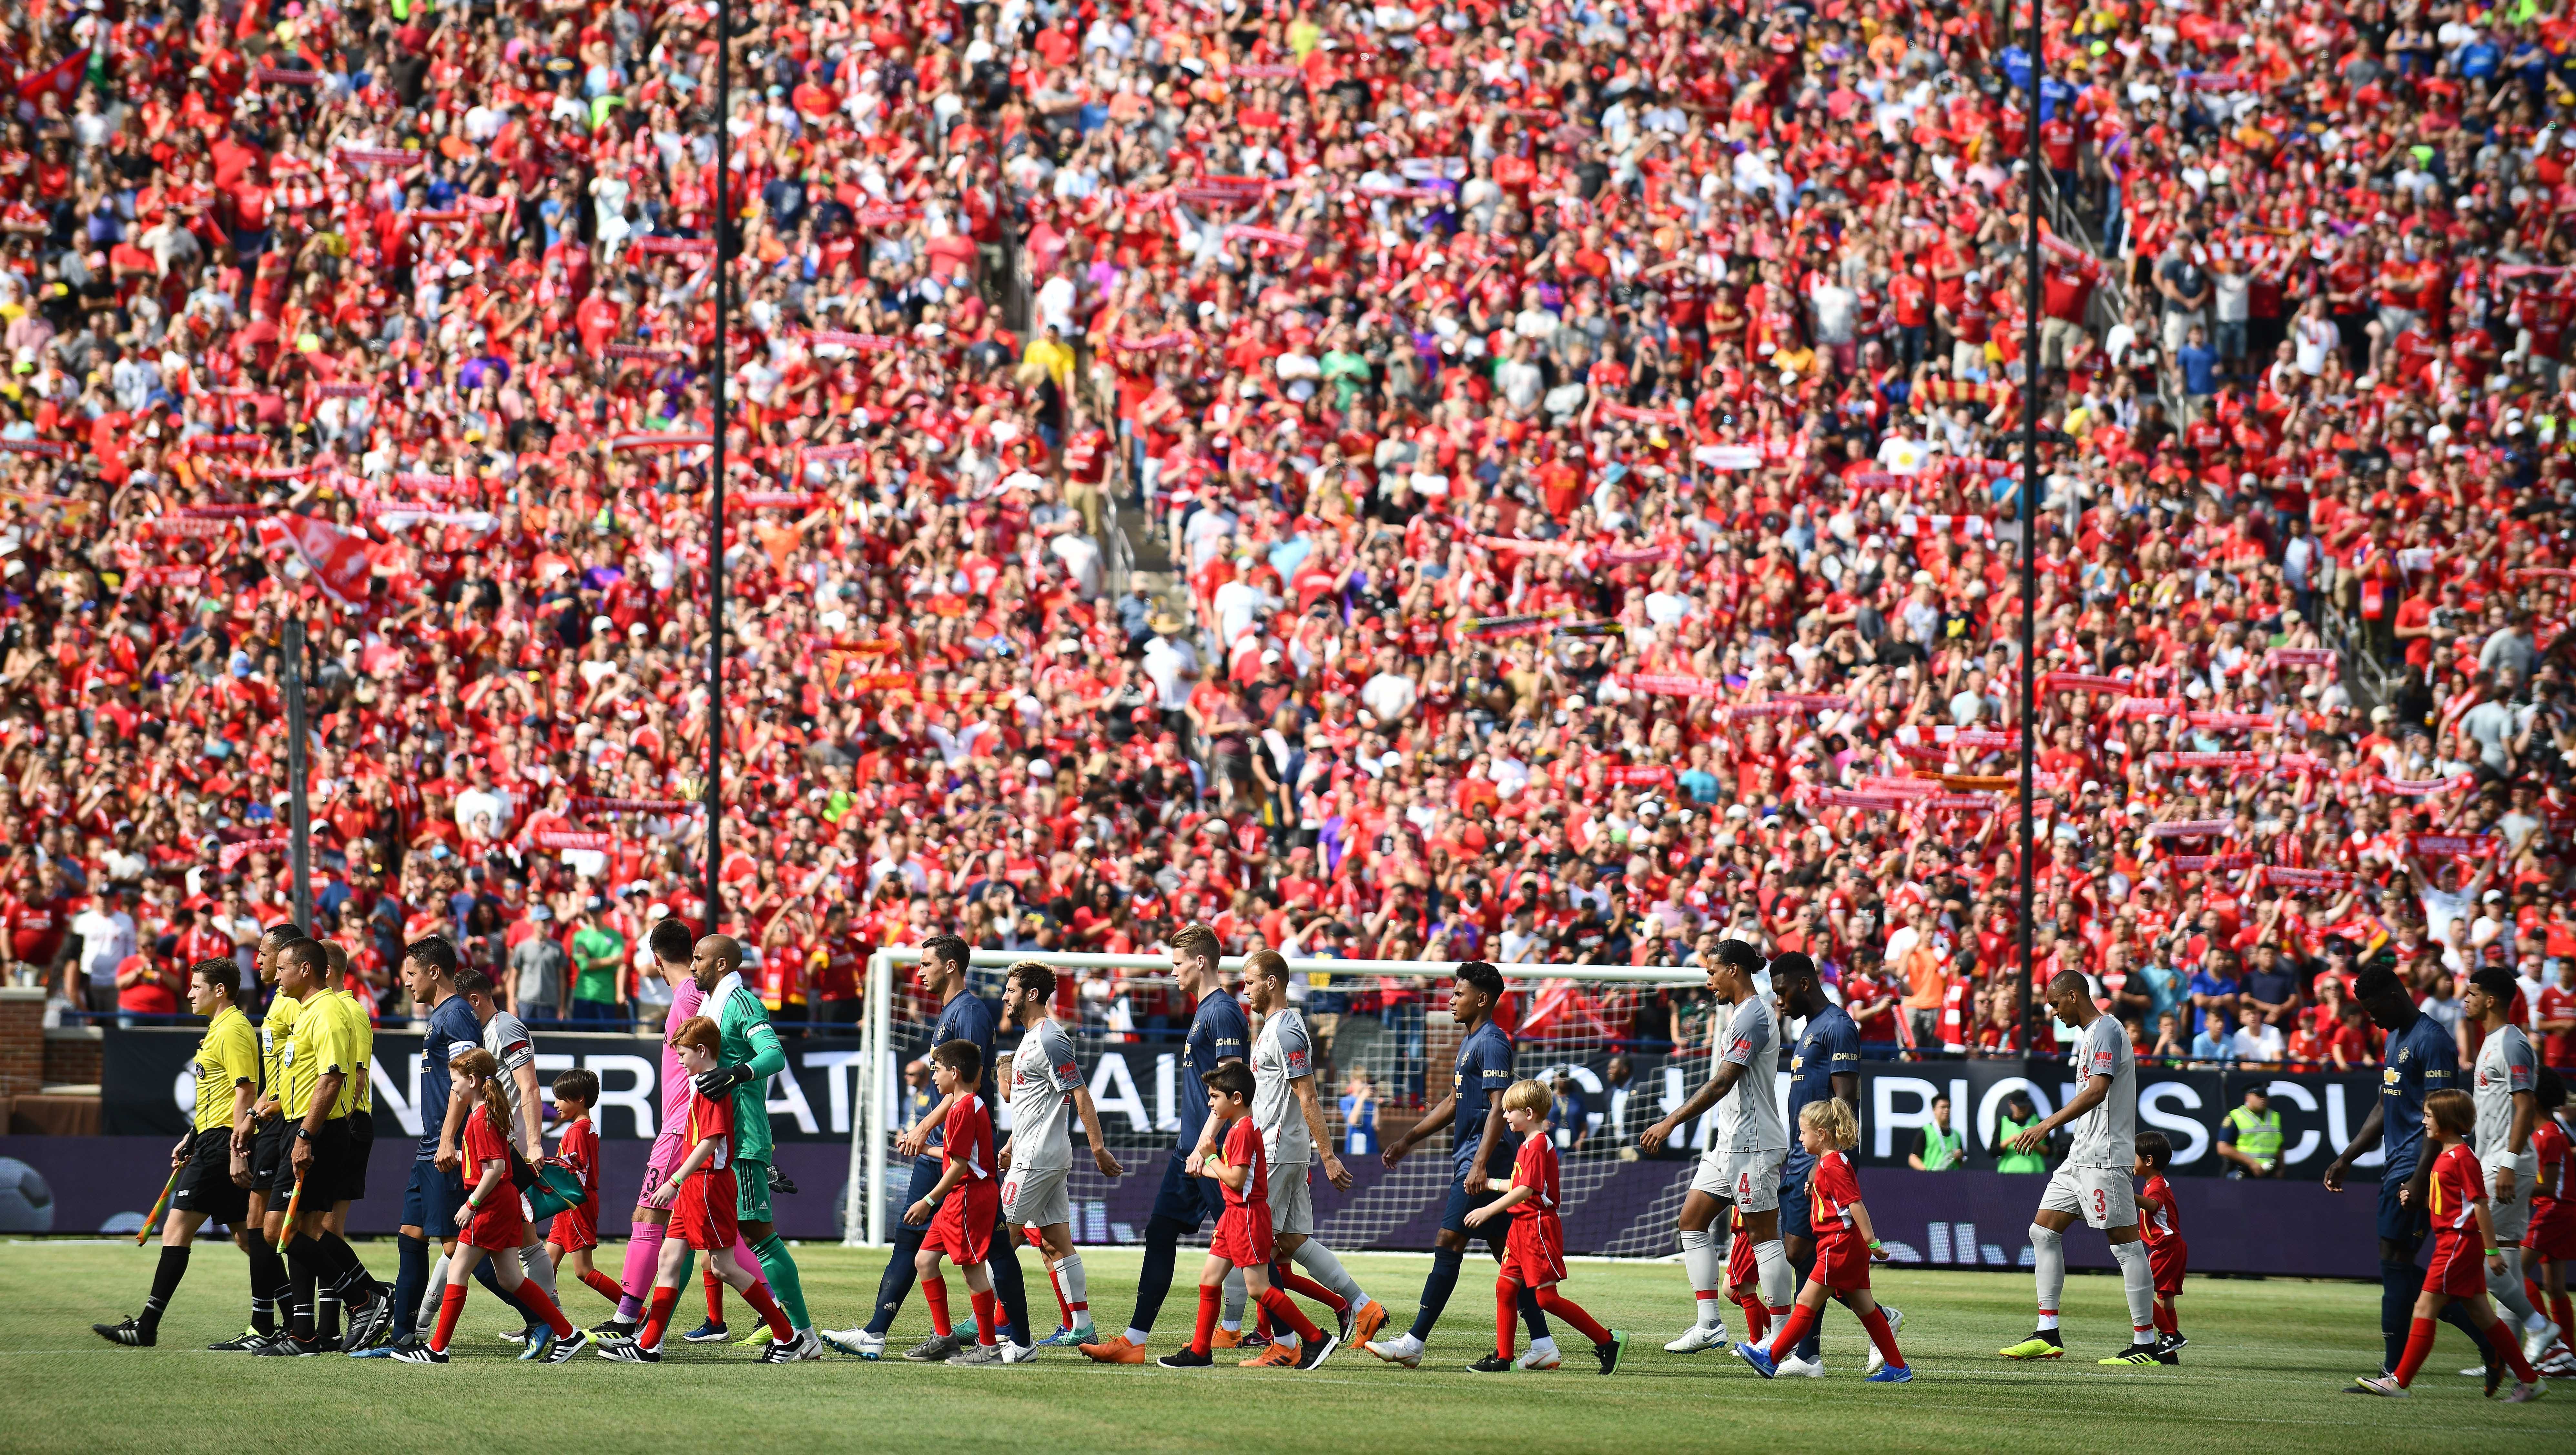 Manchester United and Liverpool make their way onto the field as over 100,000 fans cheer them on at The Big House for Saturday's International Champions Cup match.